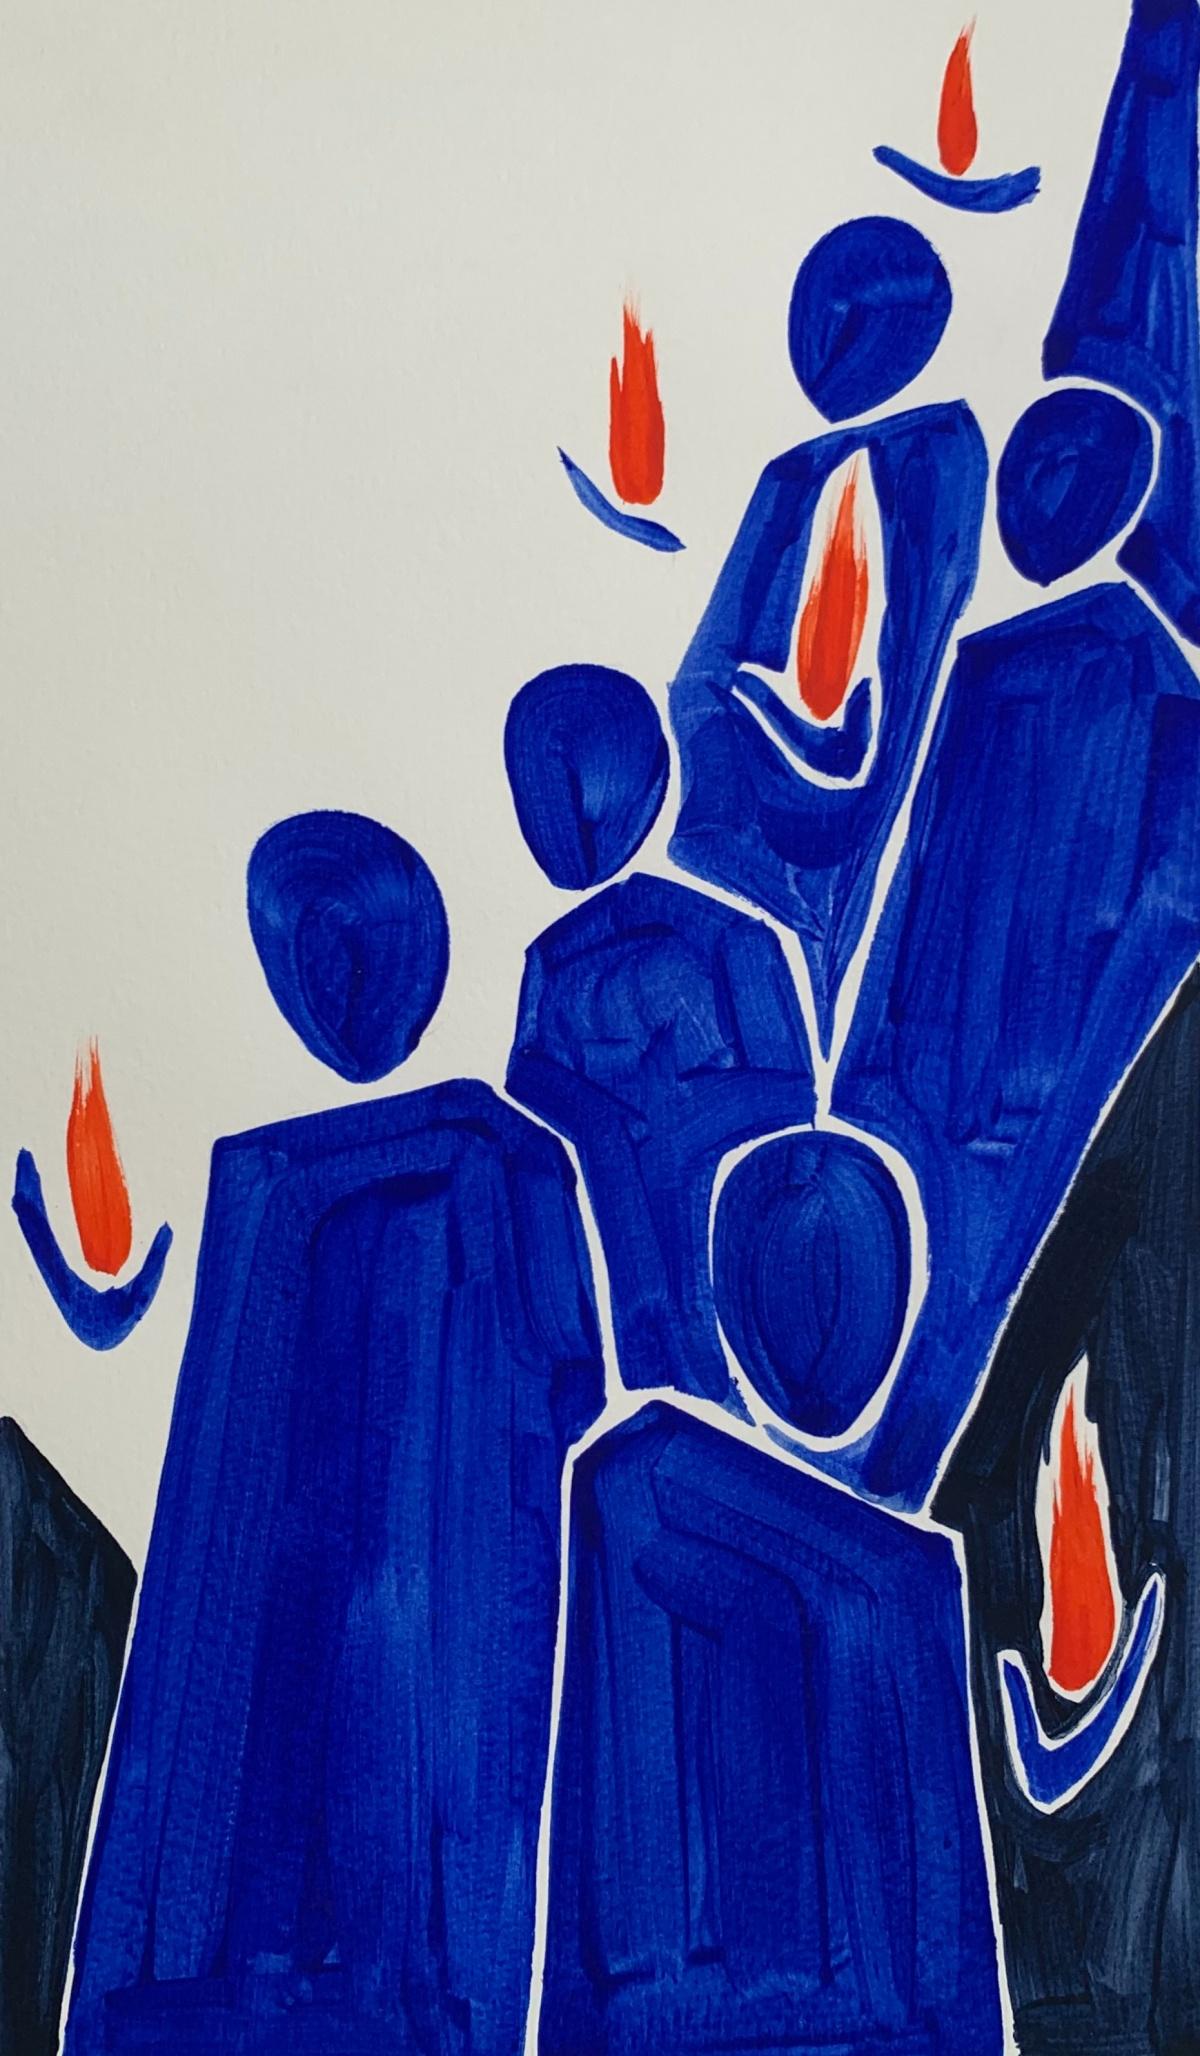 Flames - Figurative Painting on Paper, Minimalist, Colorful, Vibrant